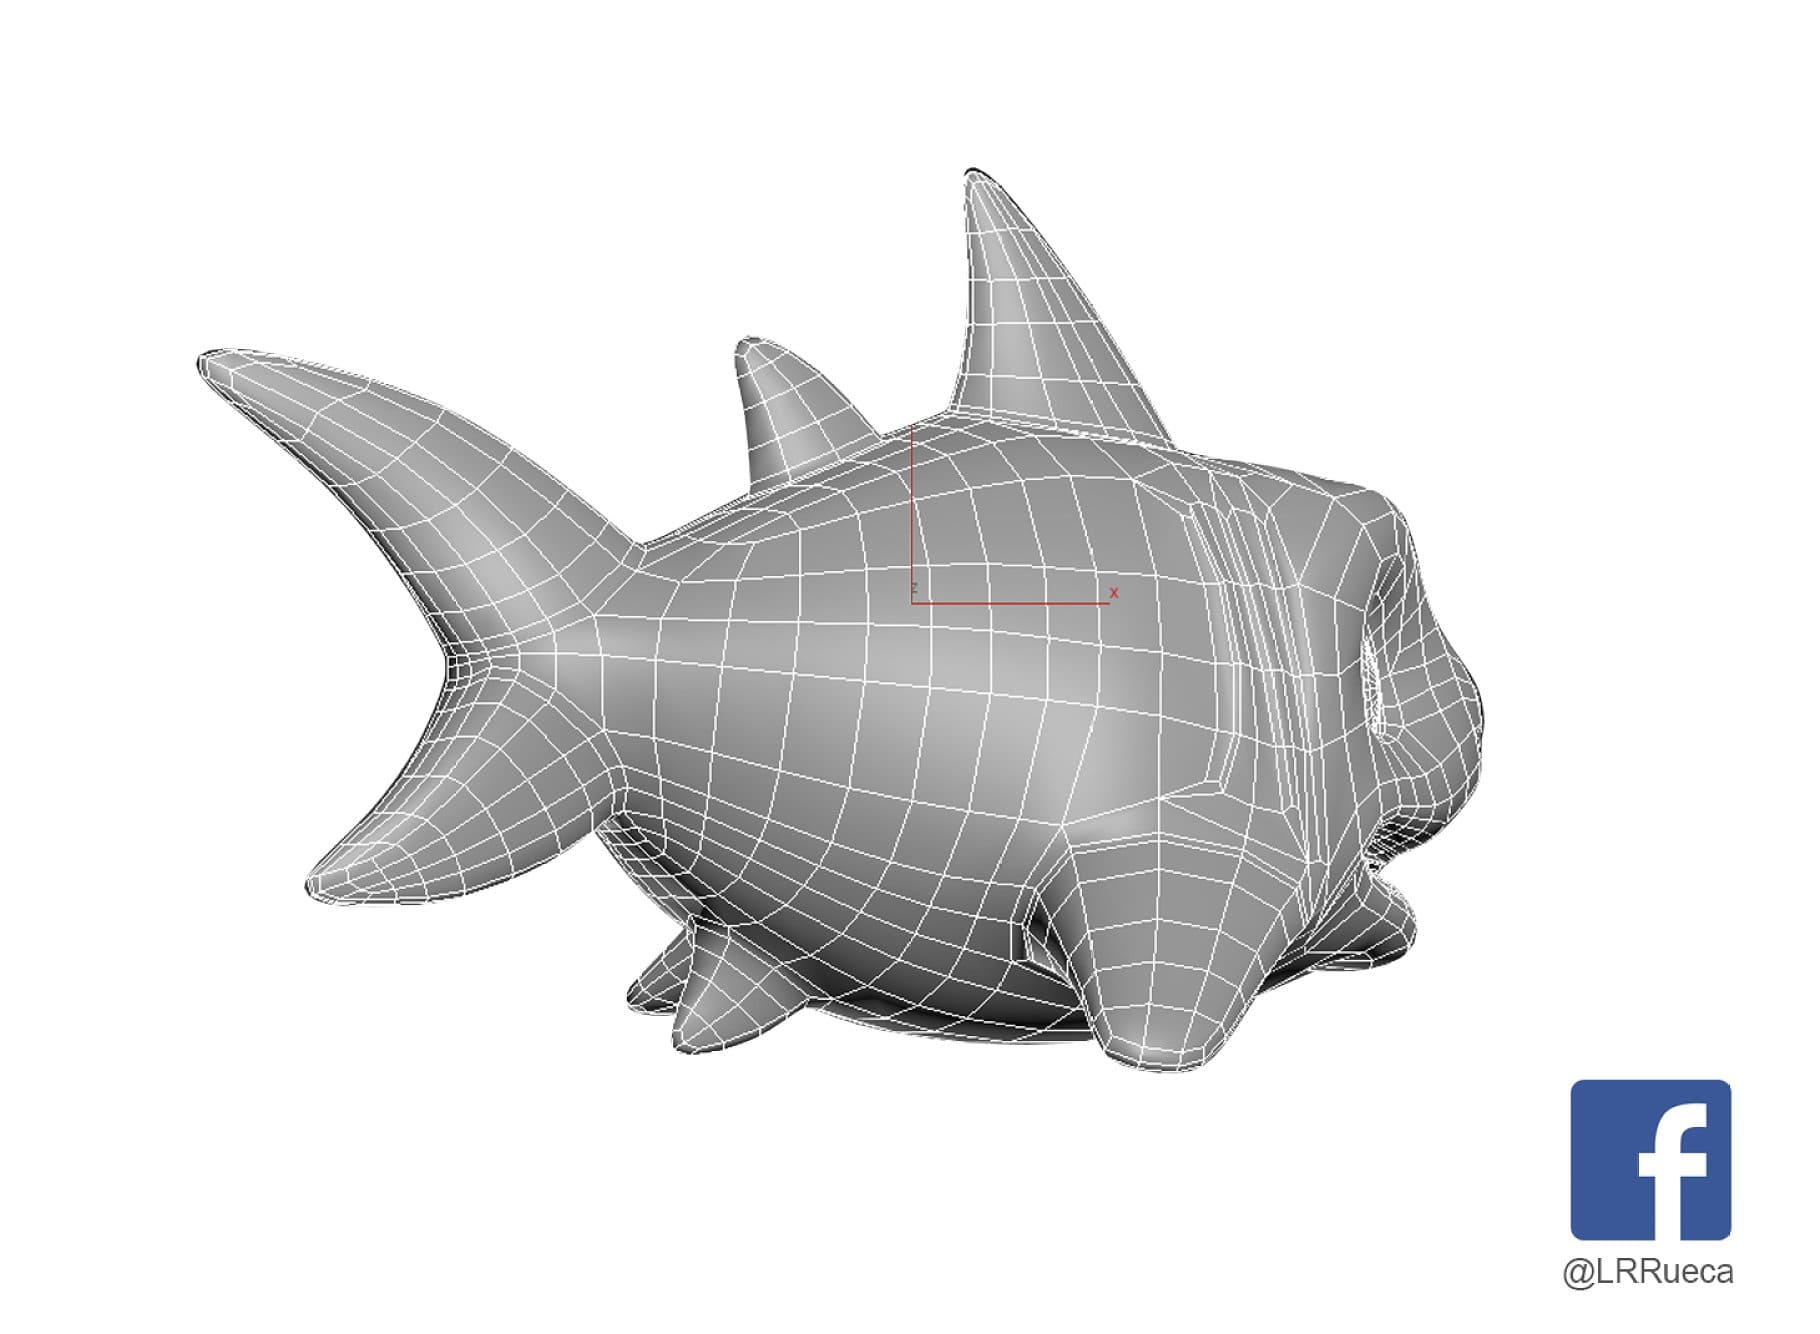 3D model of the back of a shark.